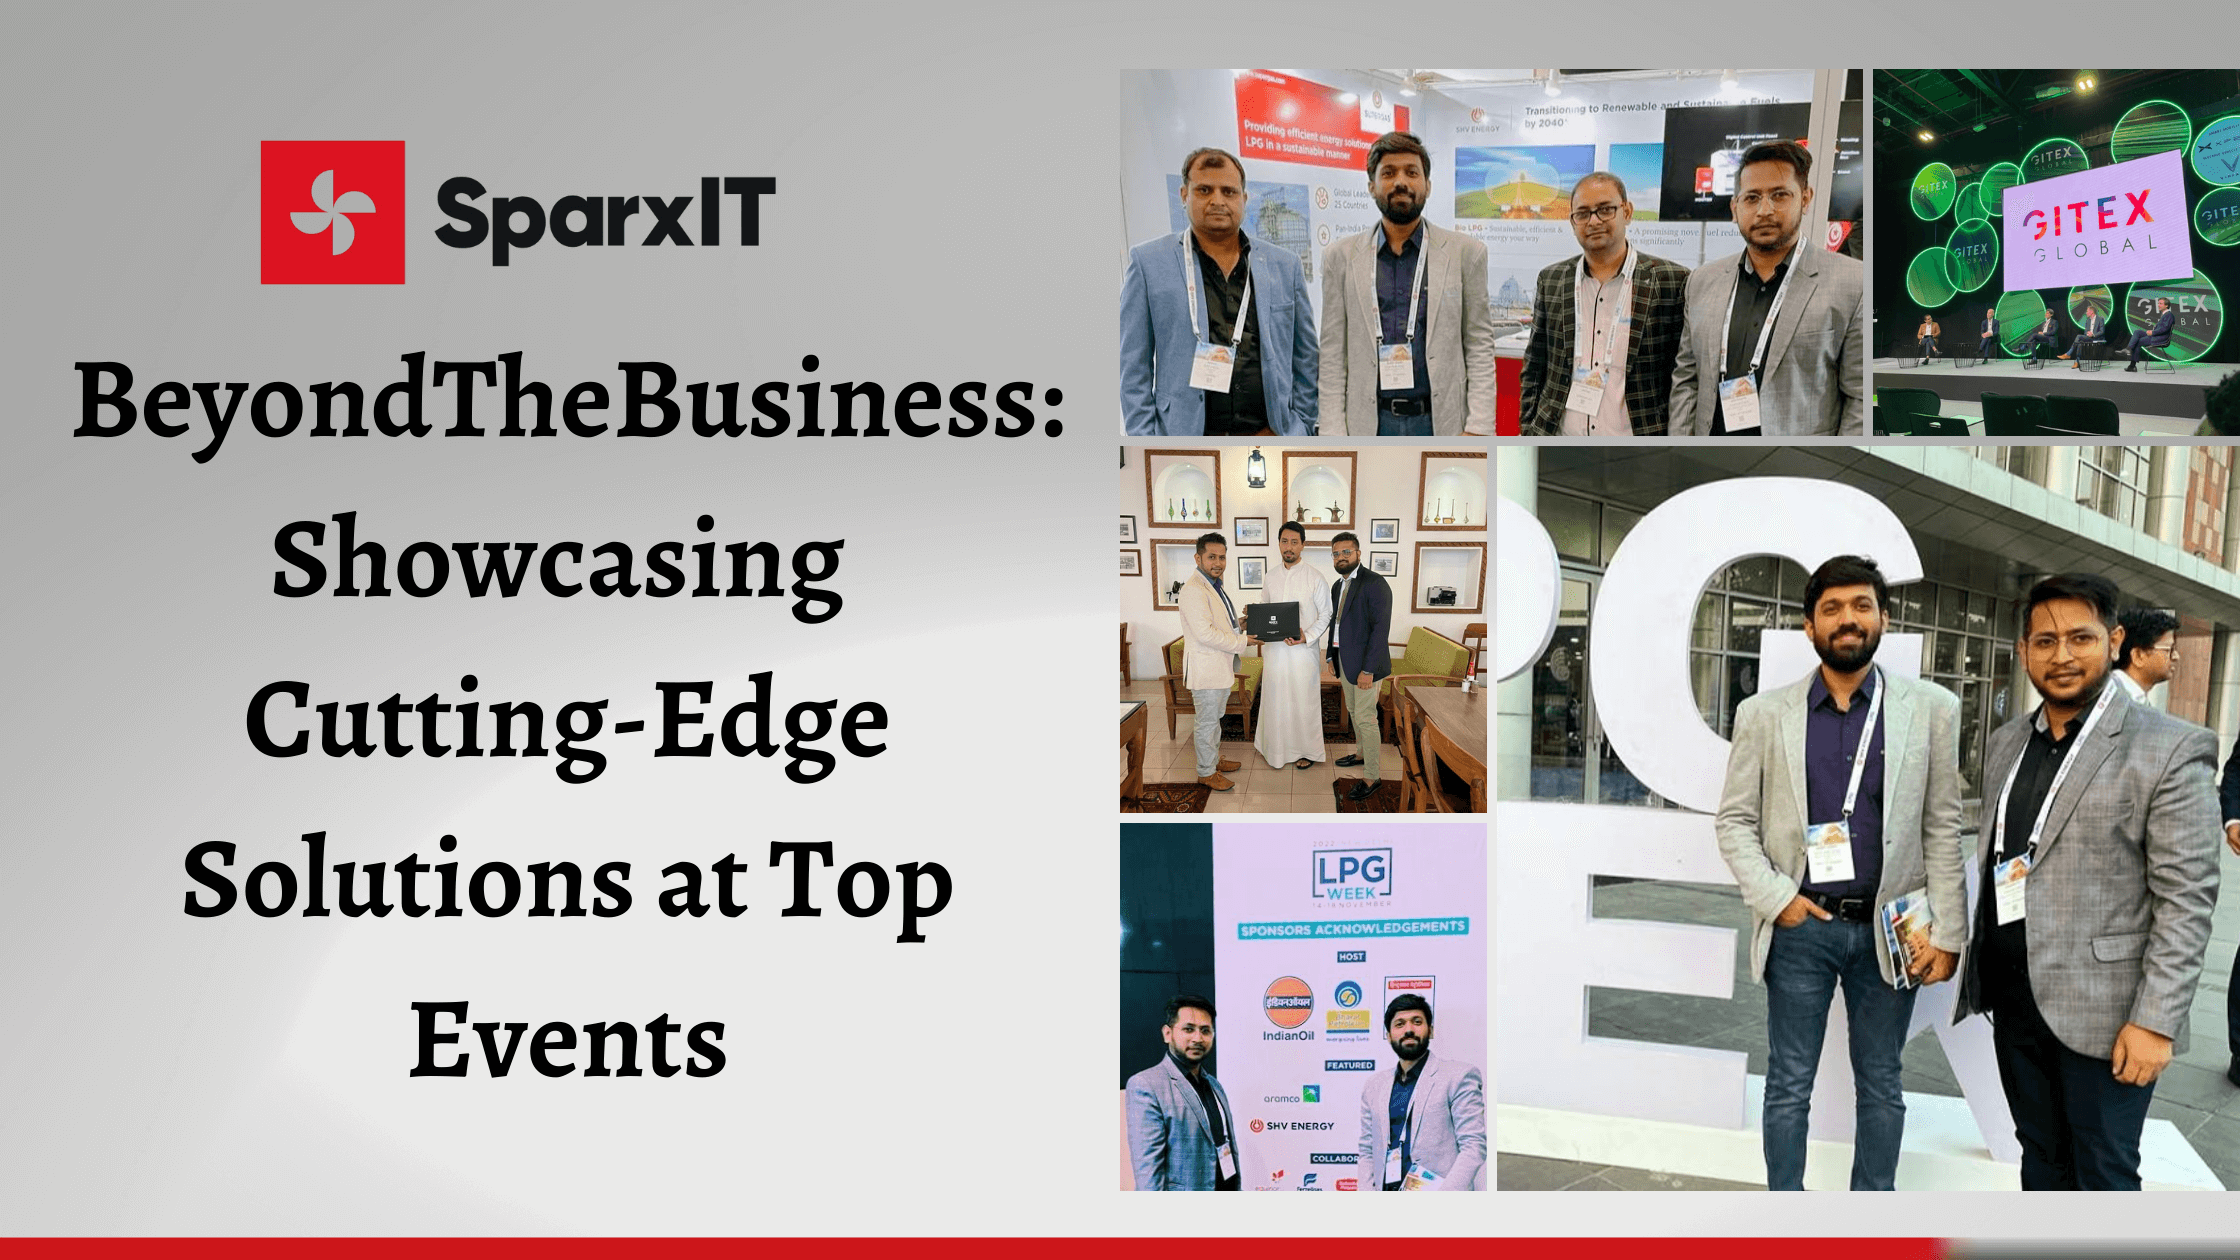 SparxIT Beyond The Business: Showcasing Cutting-Edge Solutions at Top Events